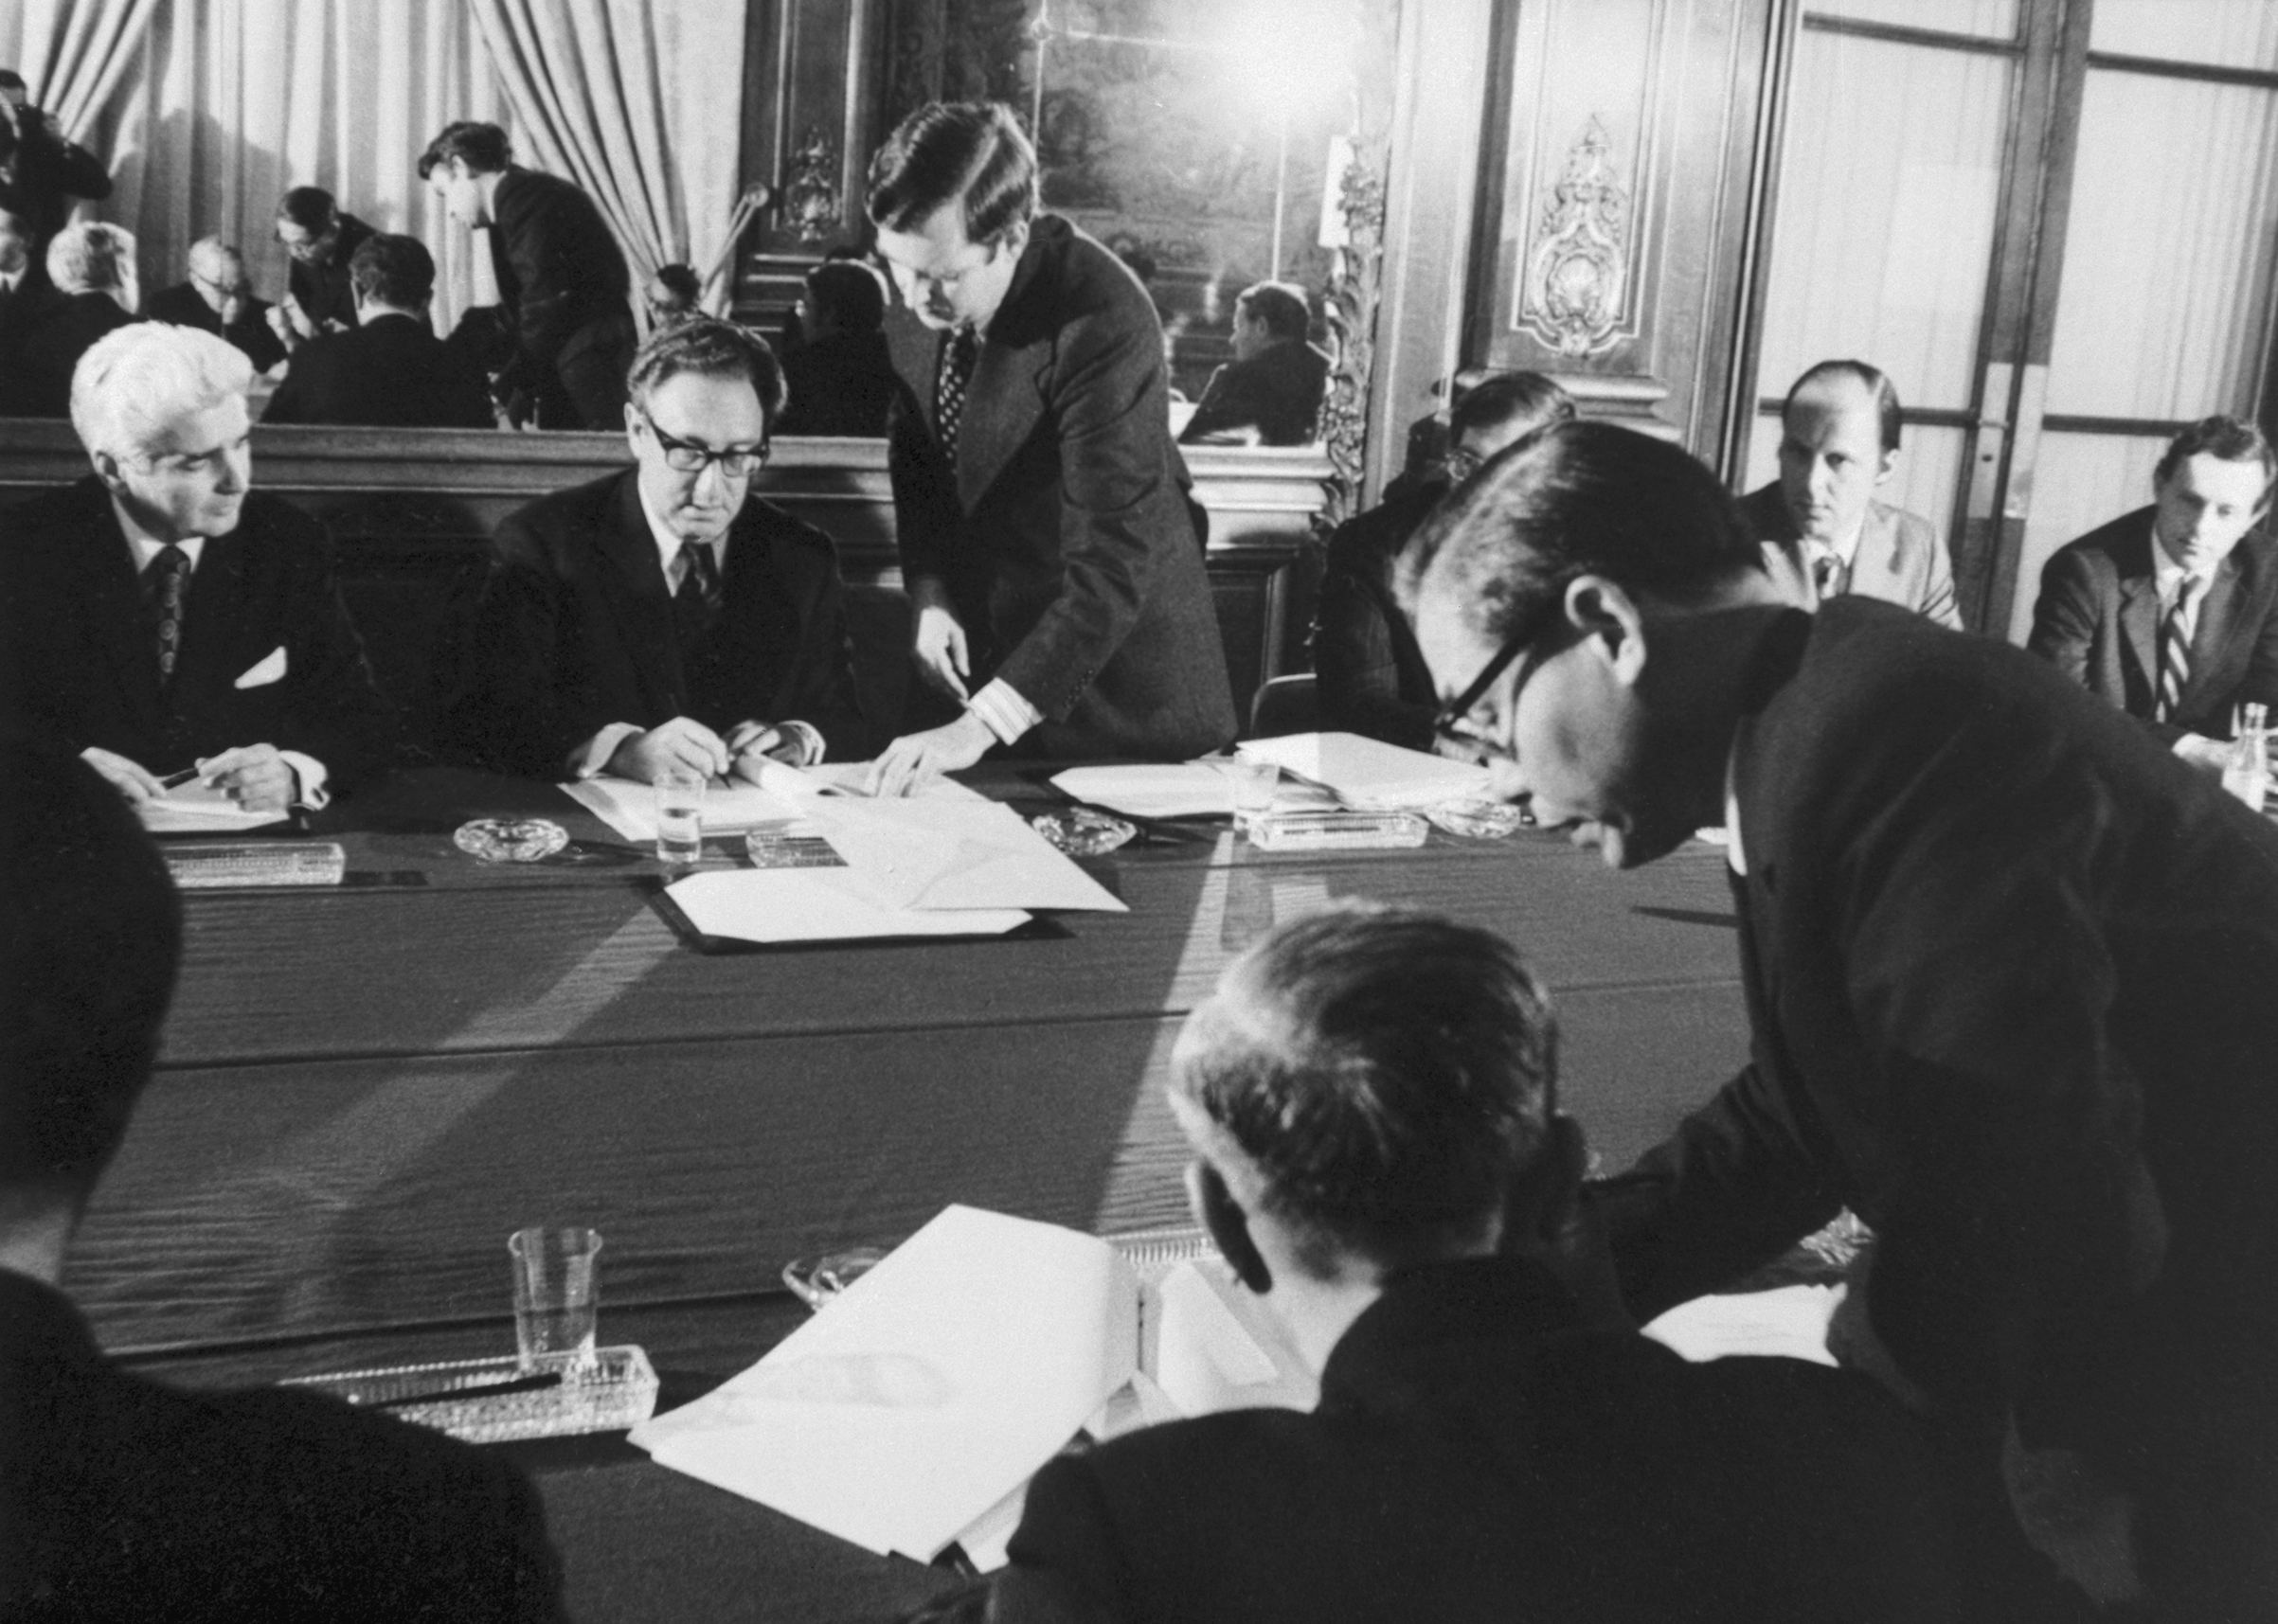 Dr. Henry Kissiinger, background, center, initialing the cease fire agreement in Paris. In the foreground Le Duc Tho affixes his signature. (Bettmann/Getty Images)